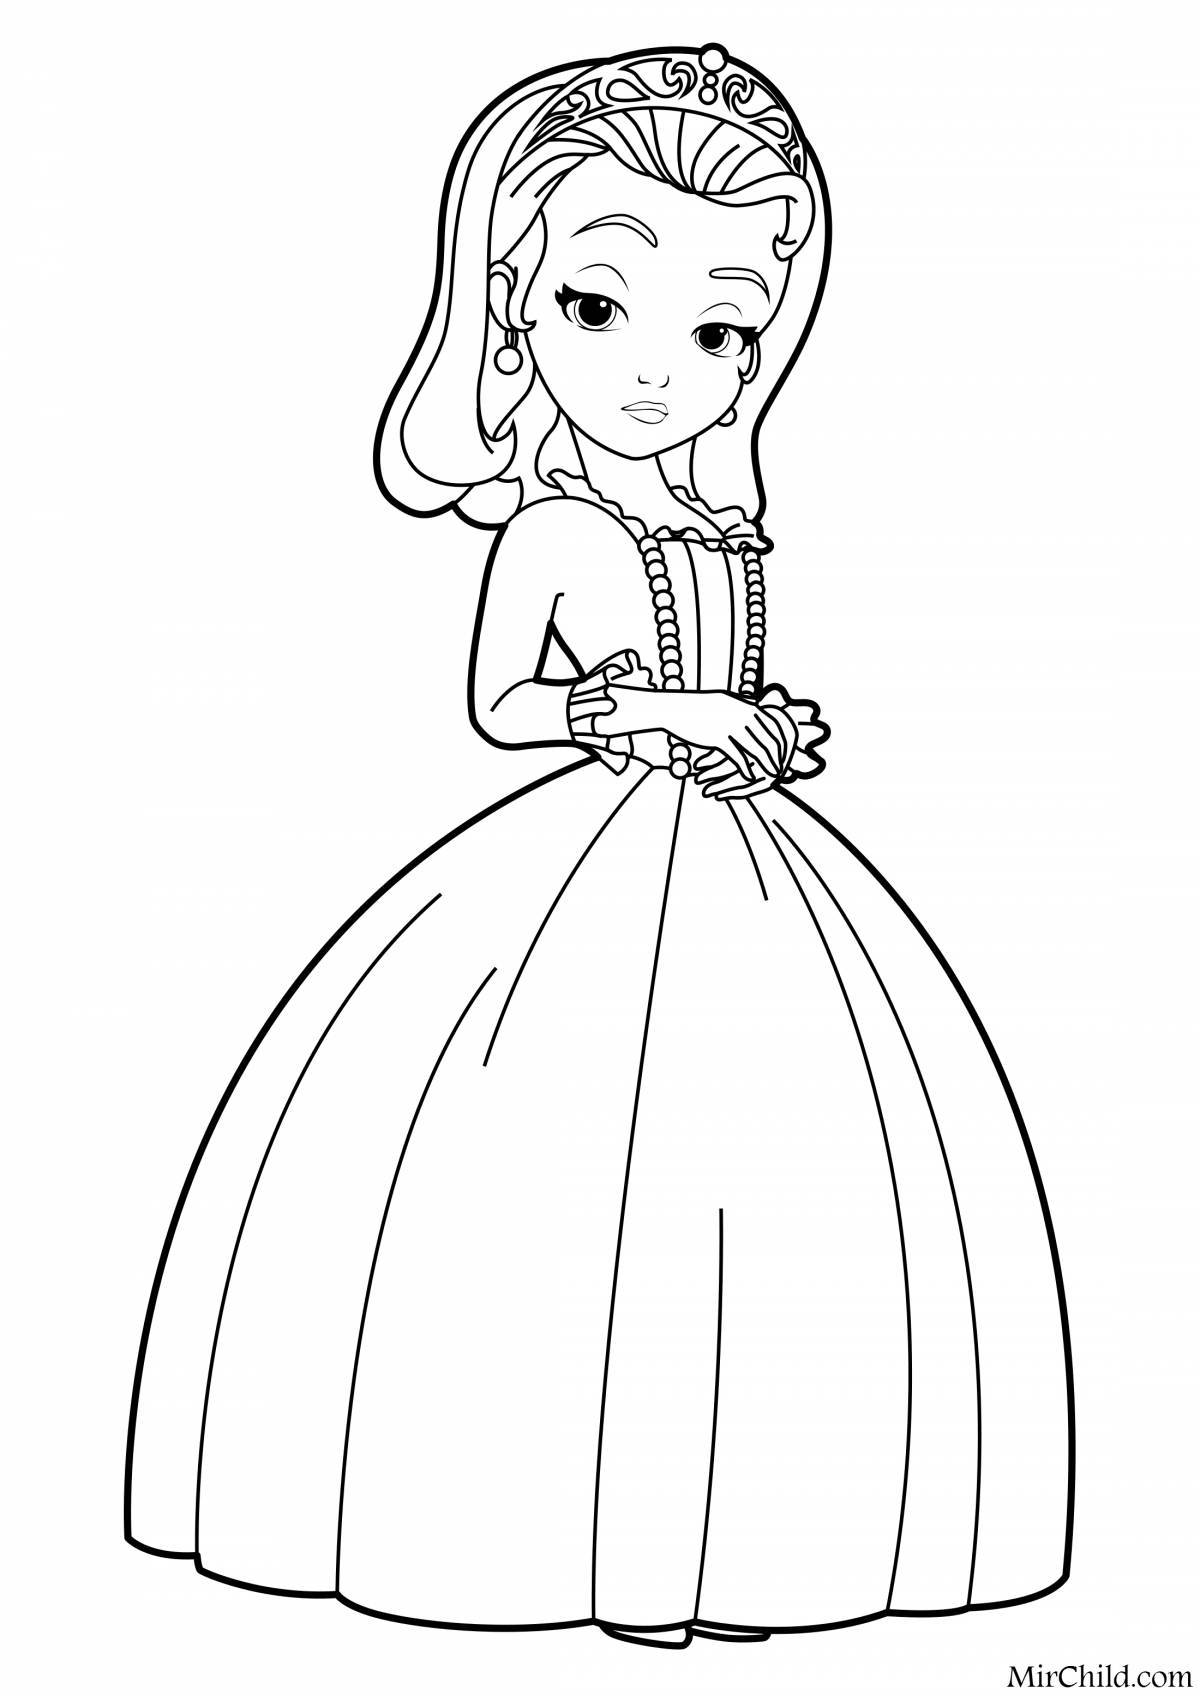 Dreamy Ember Coloring Page